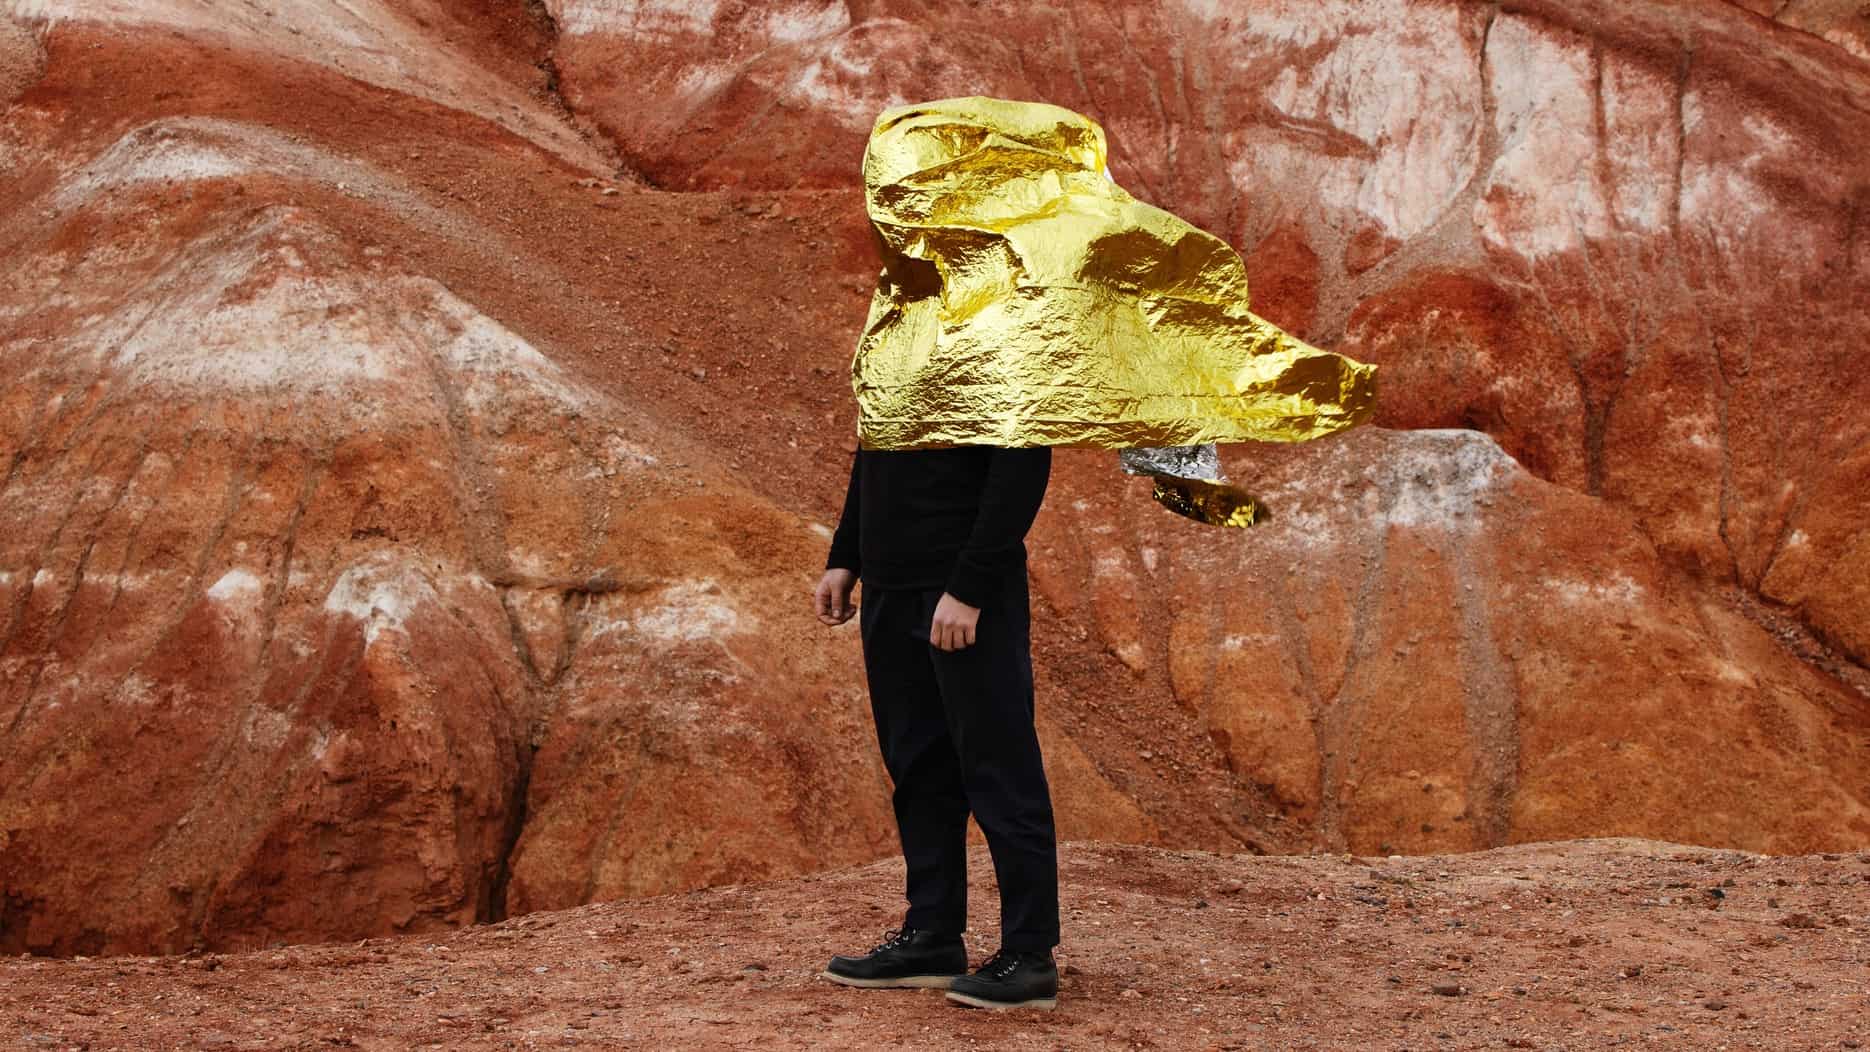 A man standing in a red rock mine is covered by a sheet of gold blowing in the wind.